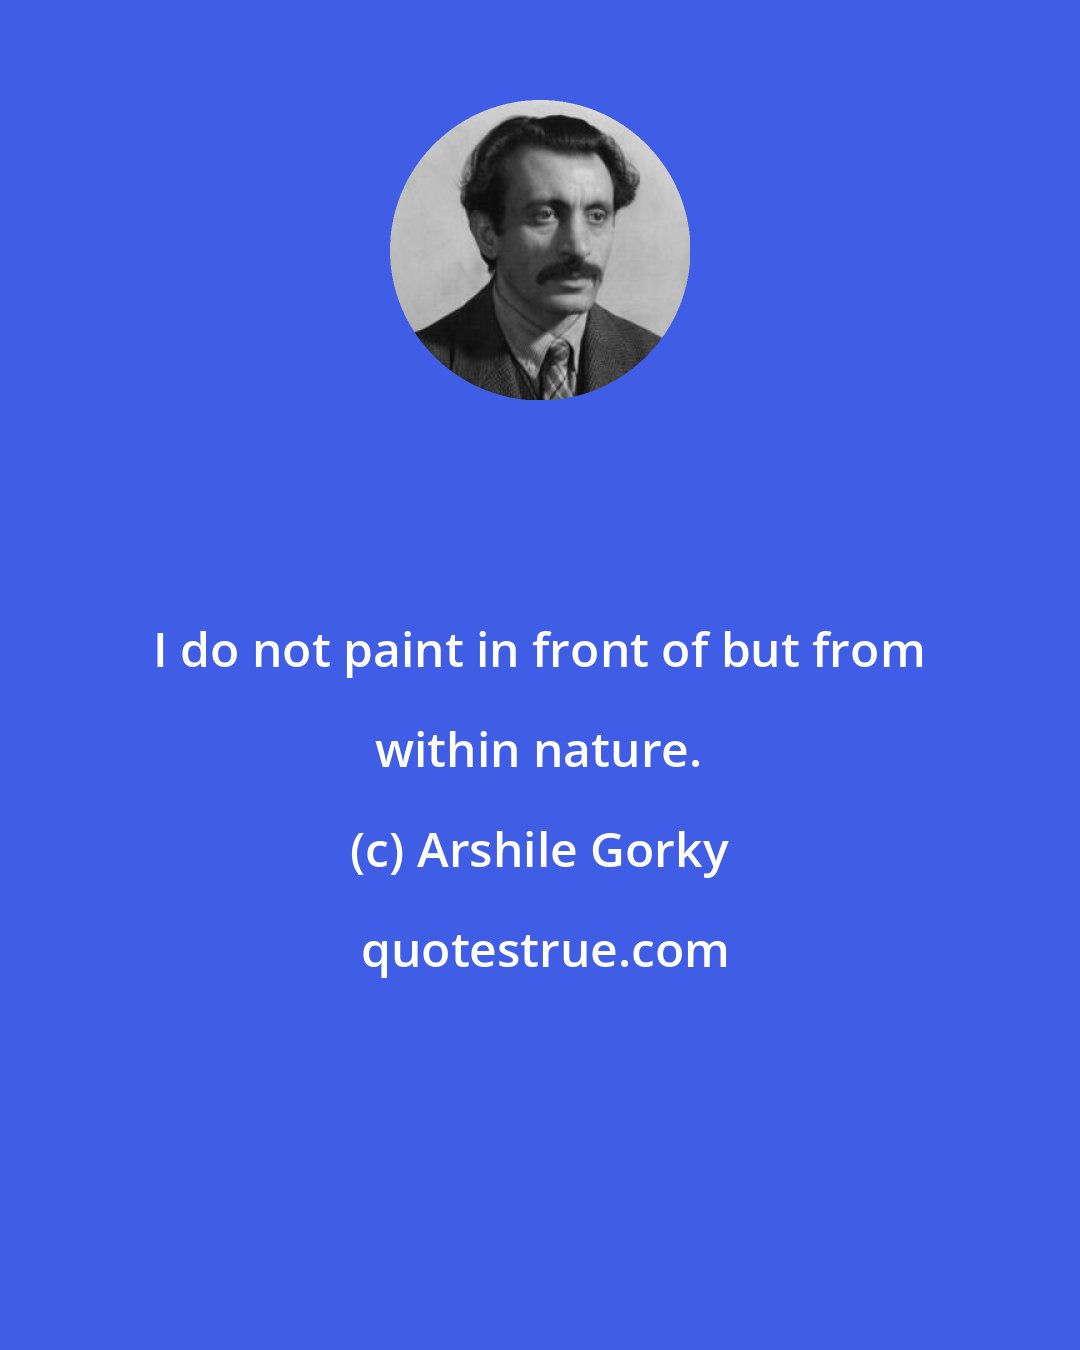 Arshile Gorky: I do not paint in front of but from within nature.